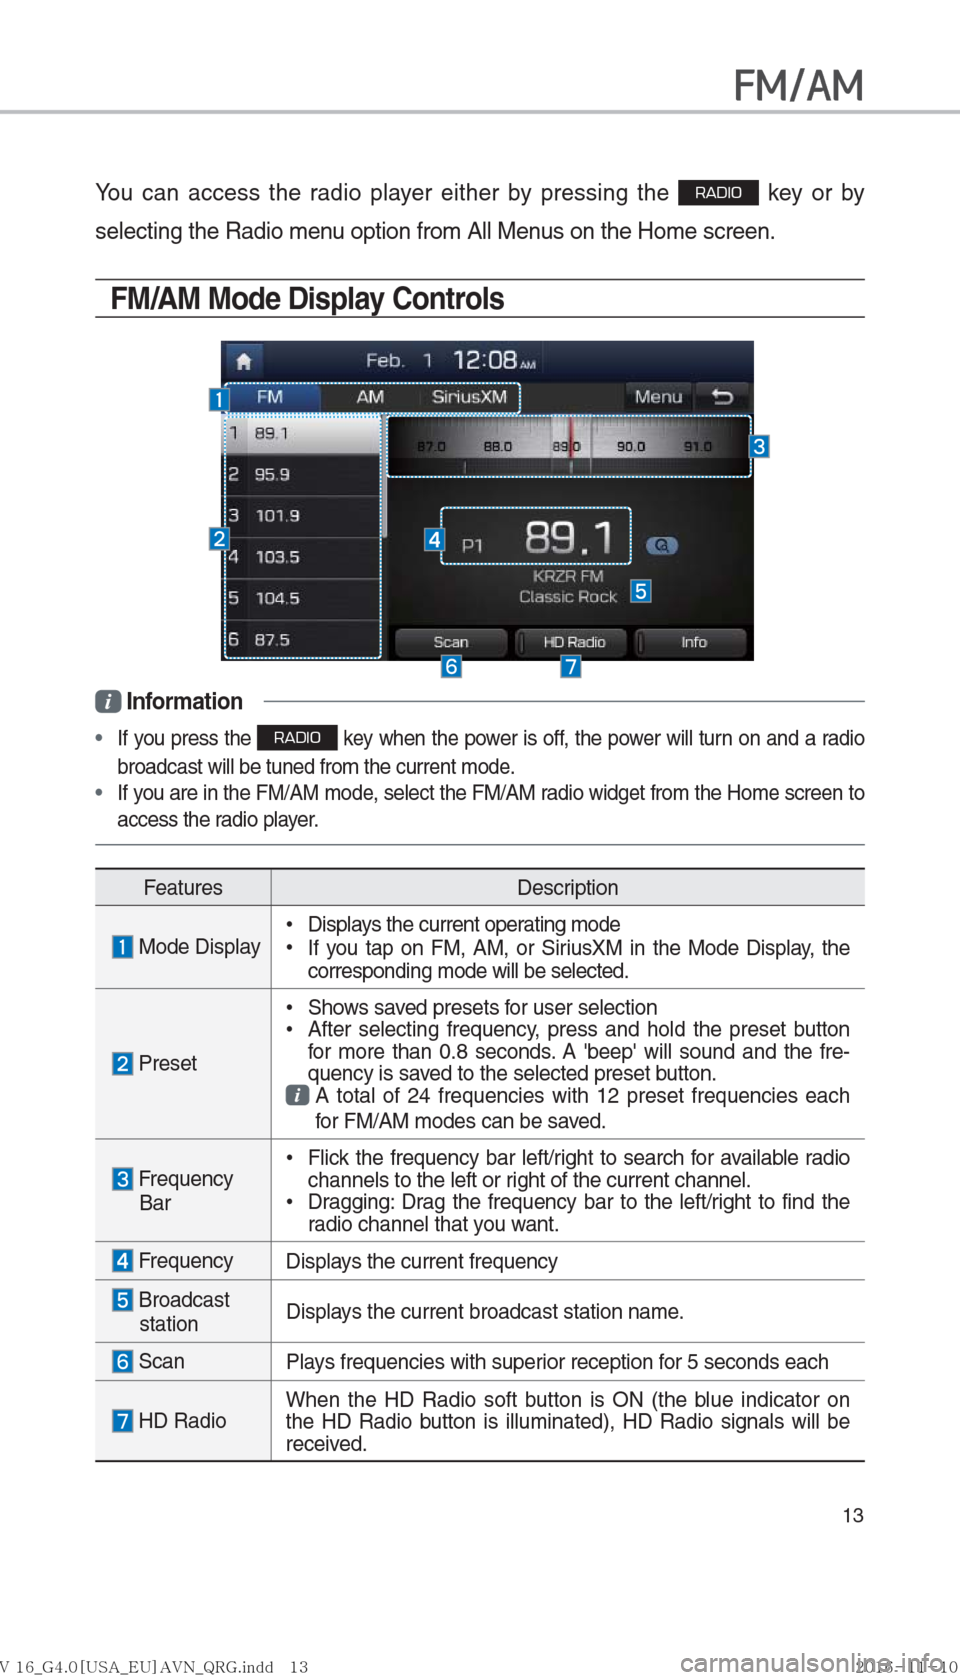 Hyundai Ioniq Hybrid 2017  Multimedia Manual 13
FM/AM 
You can access the radio player either by pressing the RADIO key or by 
selecting the Radio menu option from All Menus on the Home screen. 
FM/AM Mode Display Controls 
 Information
 If you 